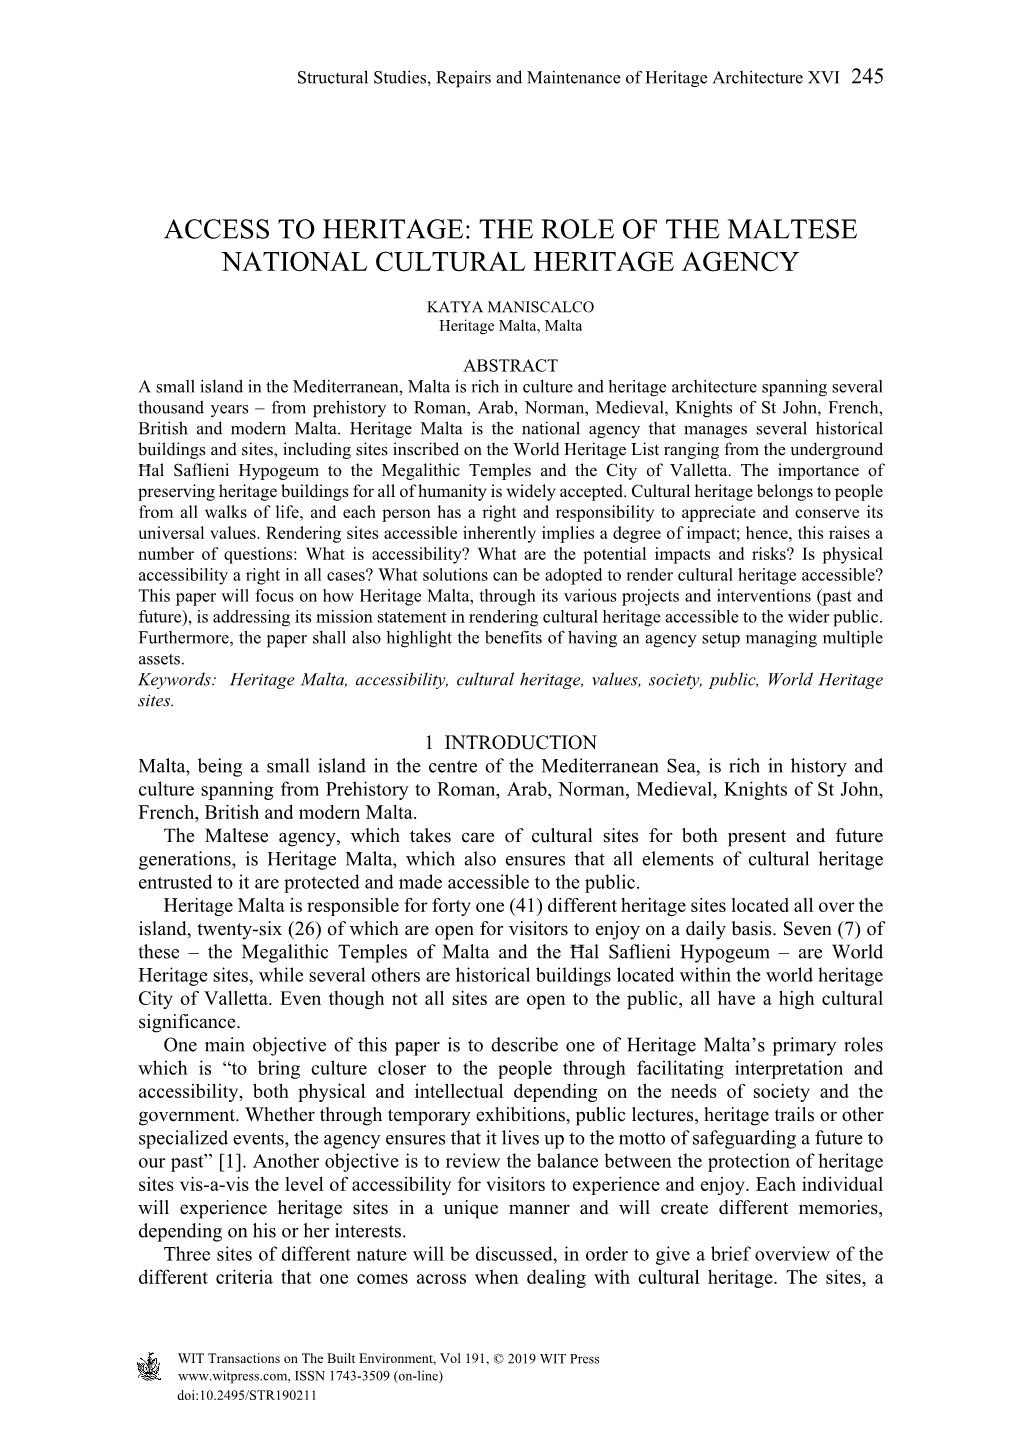 The Role of the Maltese National Cultural Heritage Agency